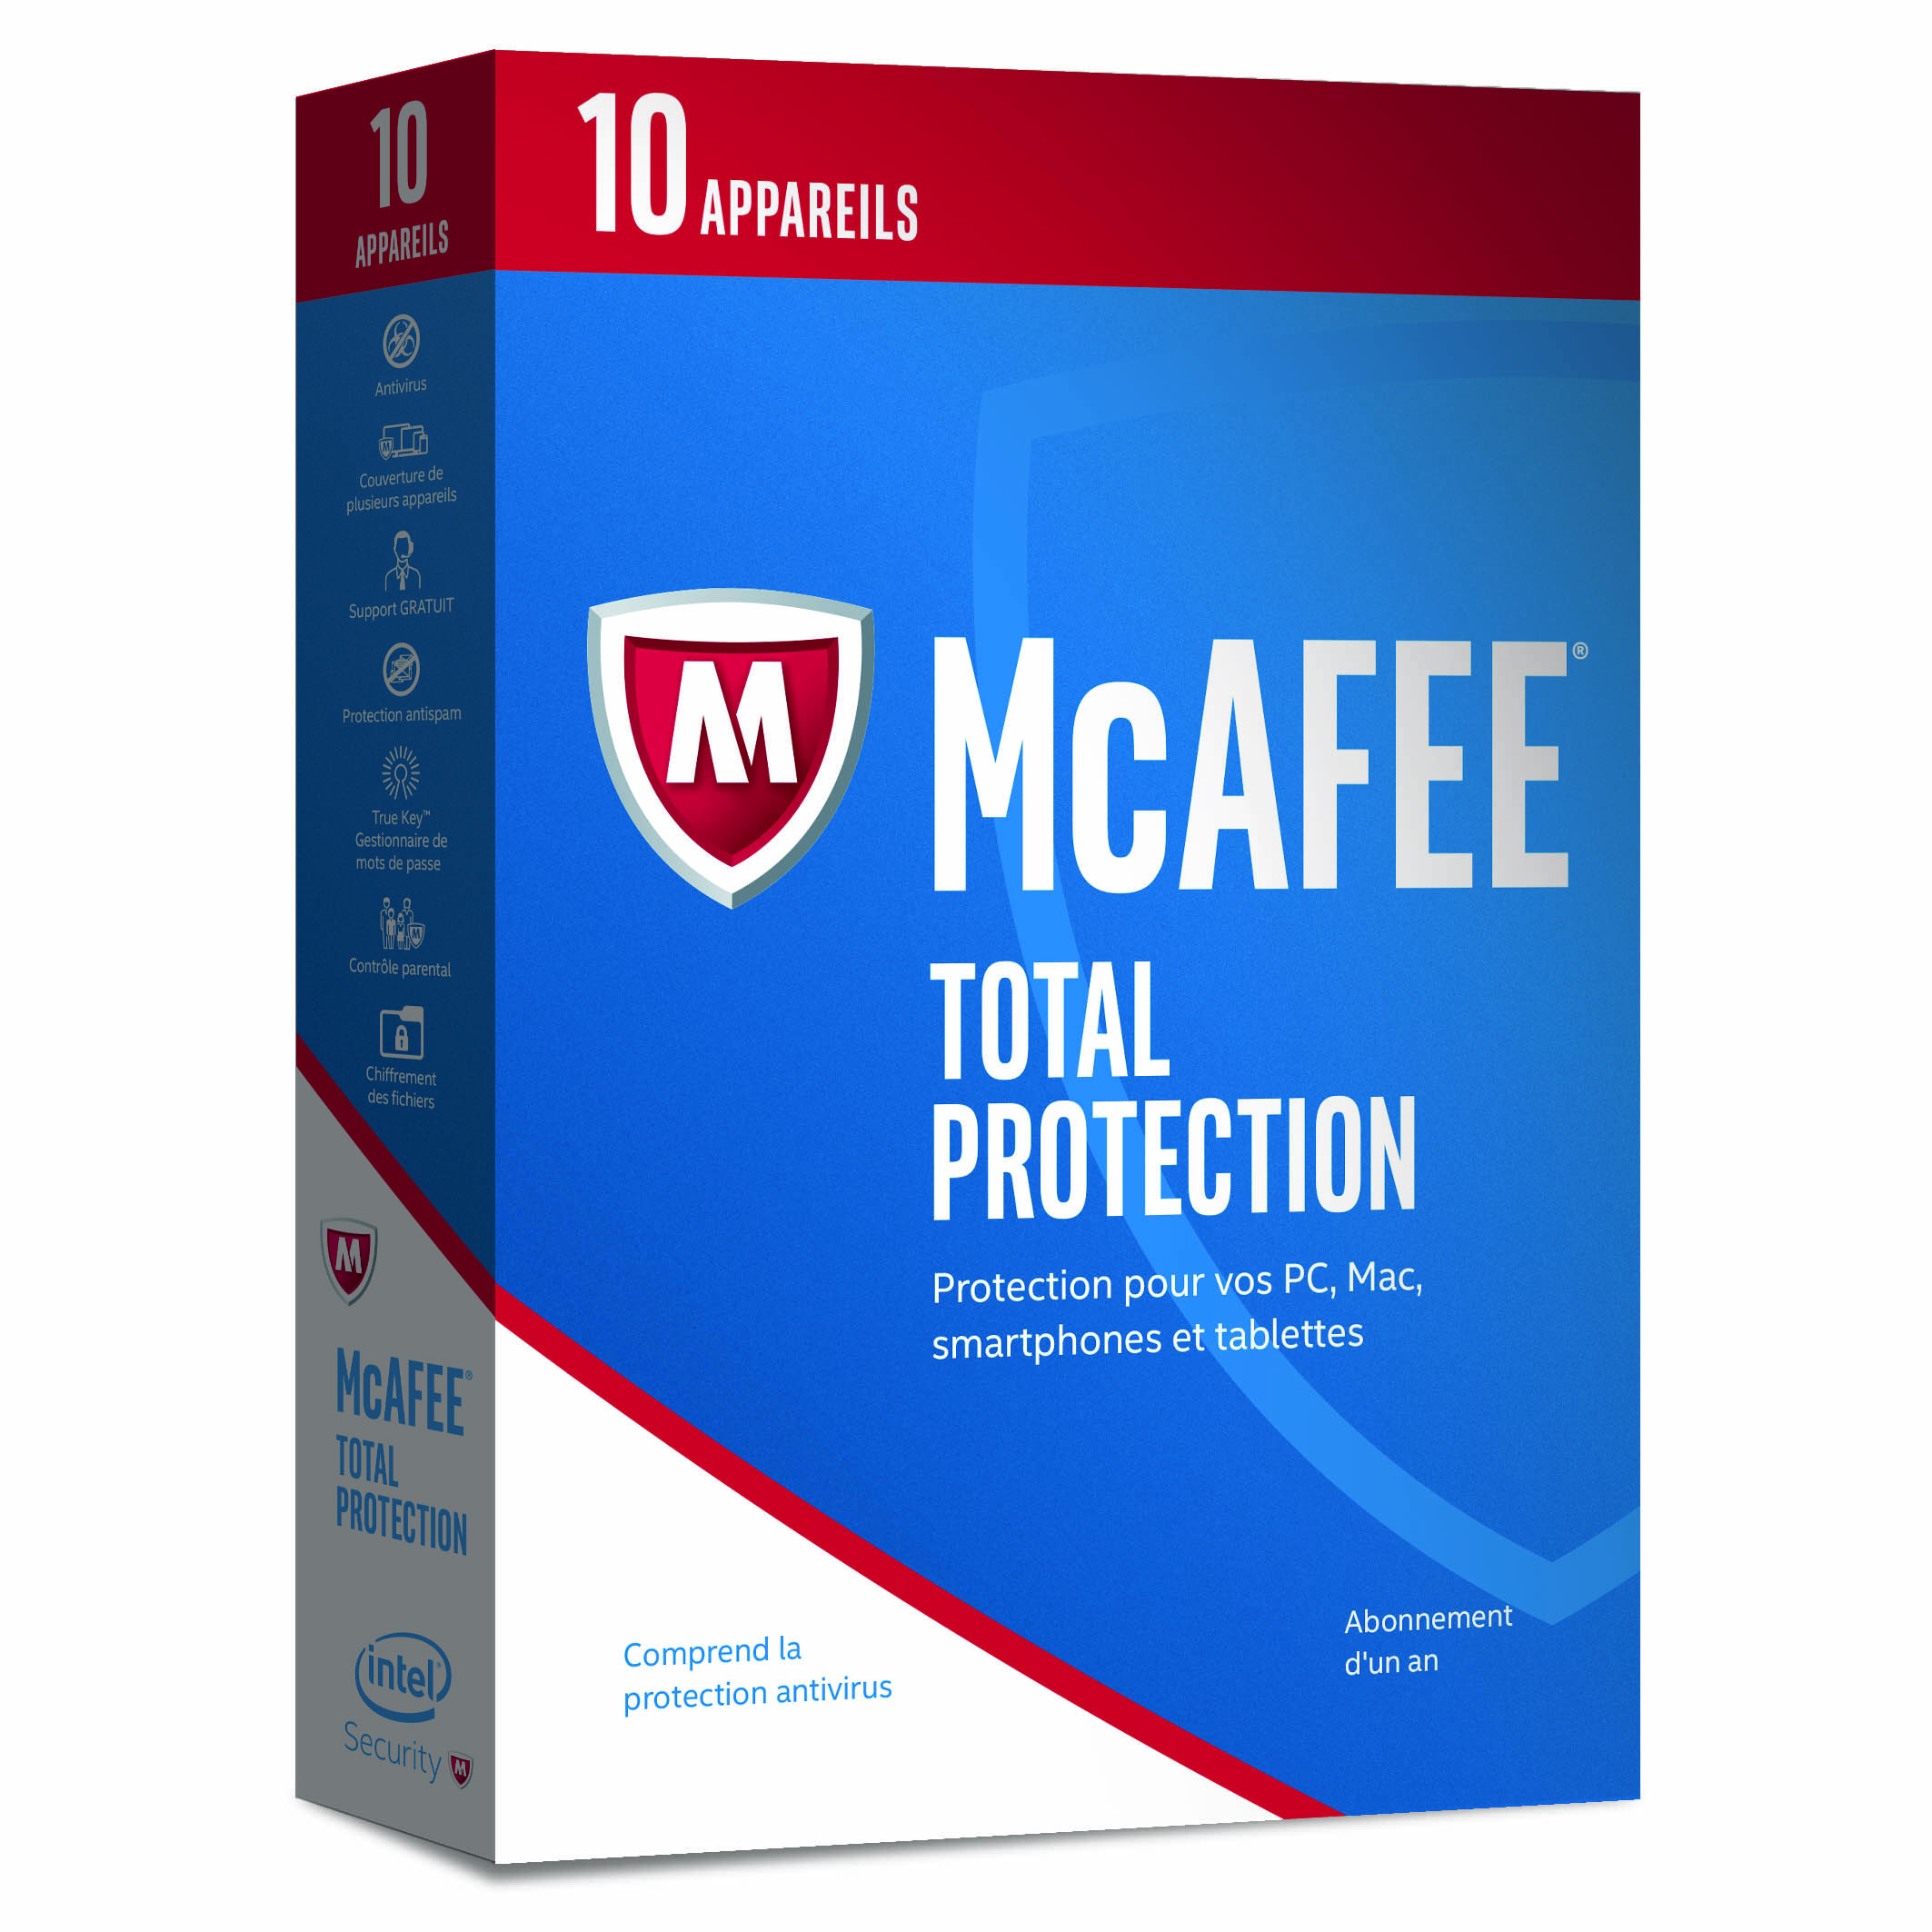 mcafee security scan plus clubic